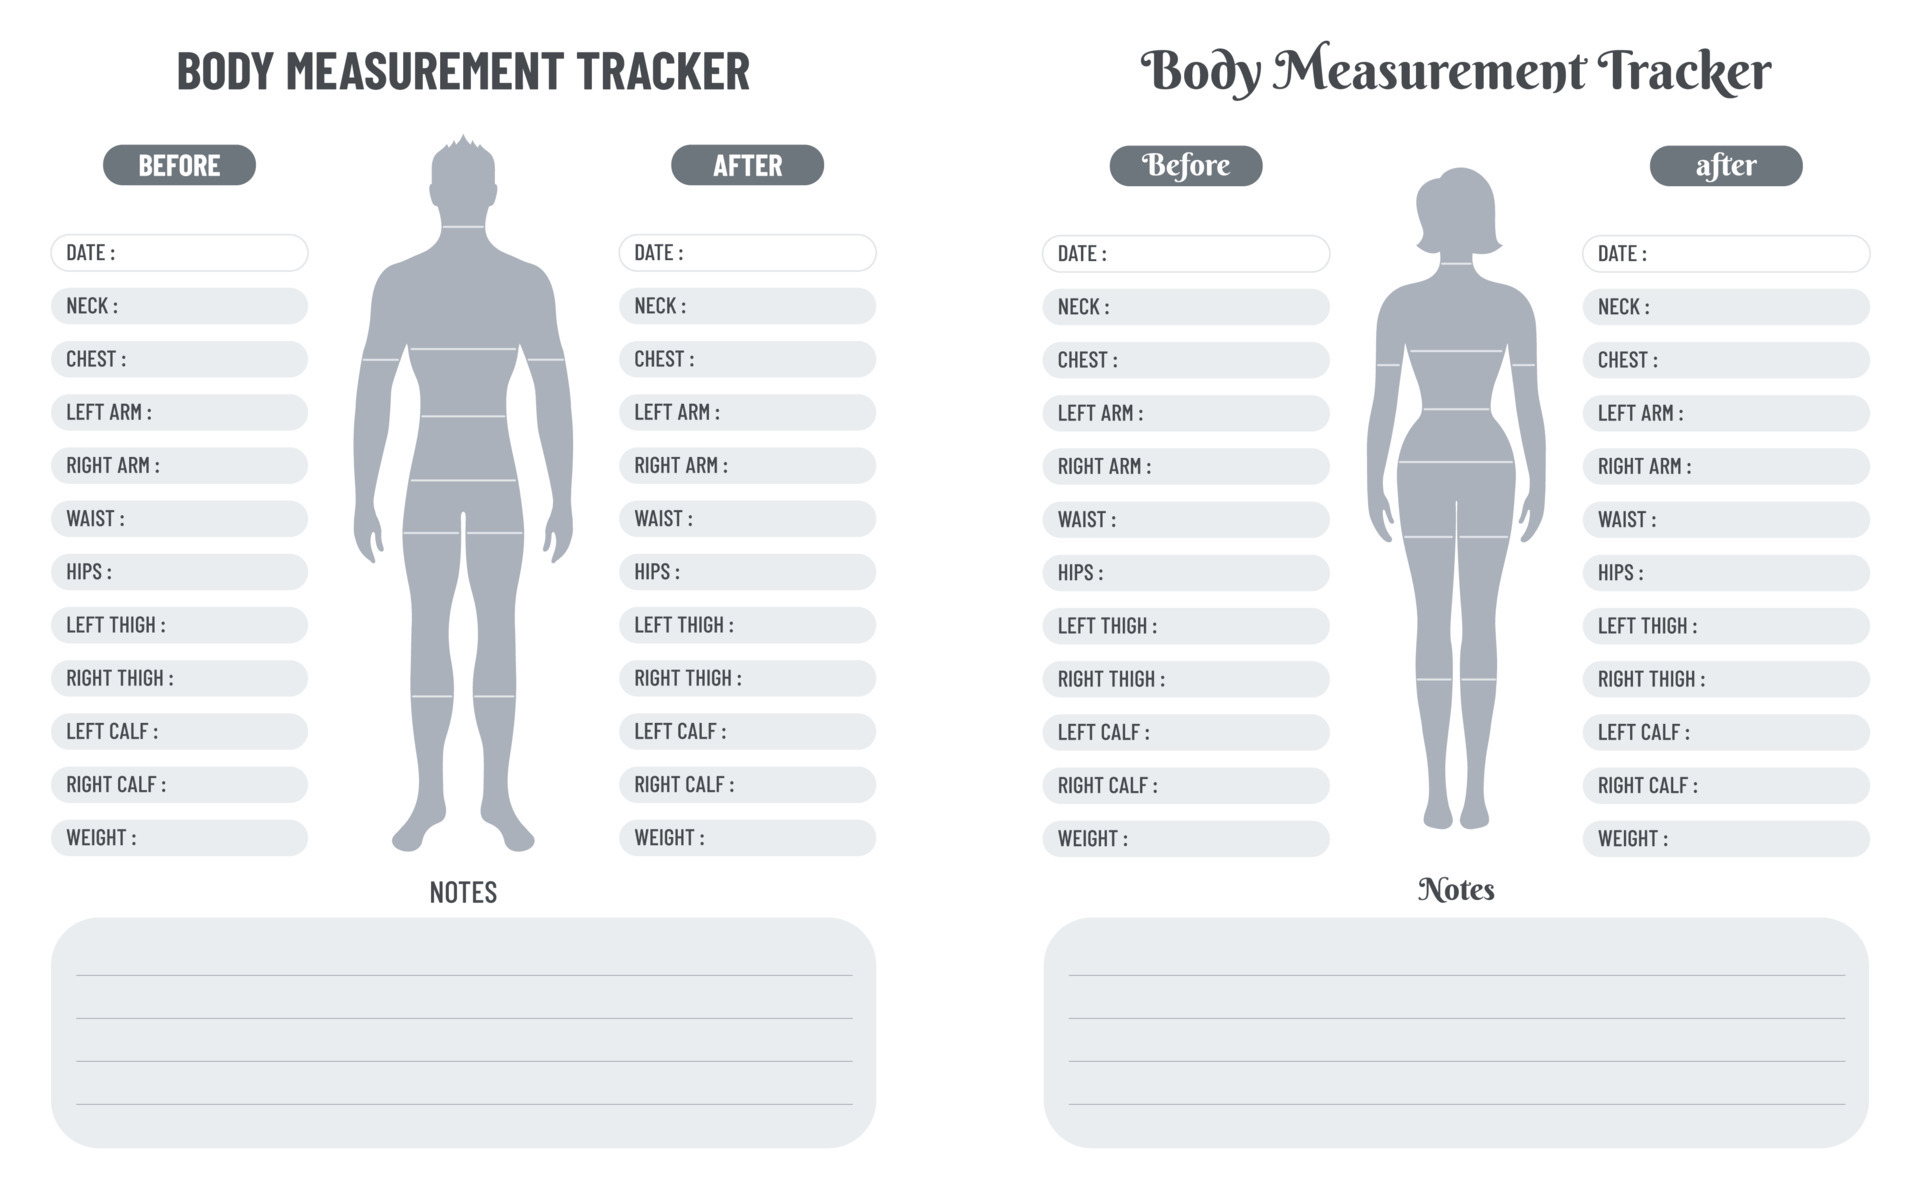 https://static.vecteezy.com/system/resources/previews/004/260/976/original/body-measurement-tracker-for-men-and-women-to-weight-loss-vector.jpg